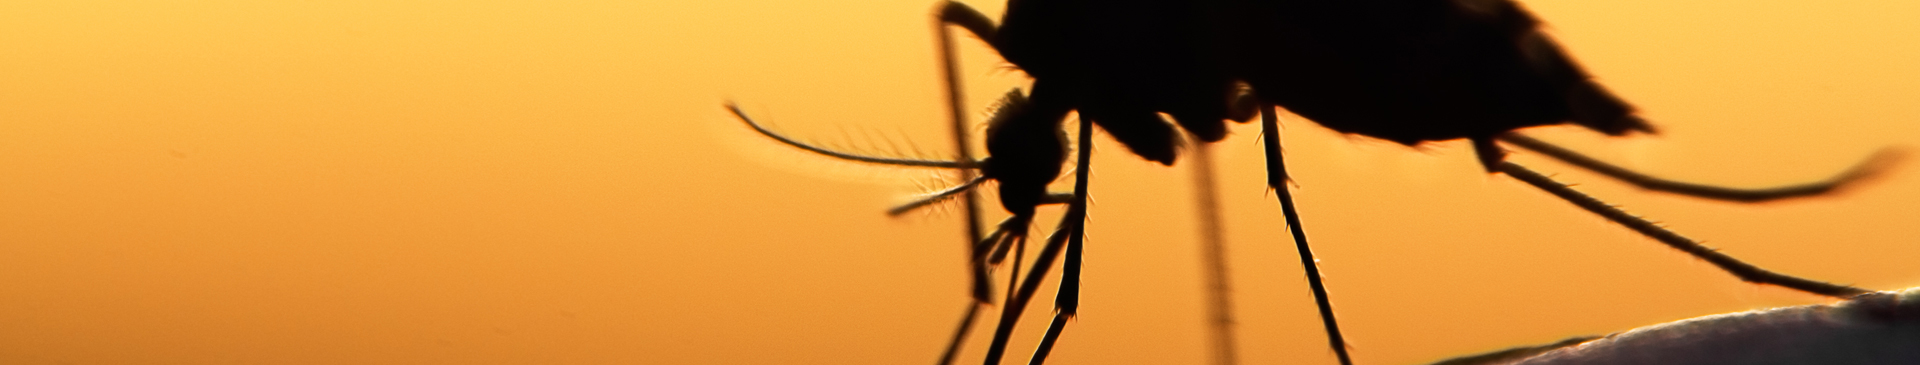 close up of mosquito against an orange background